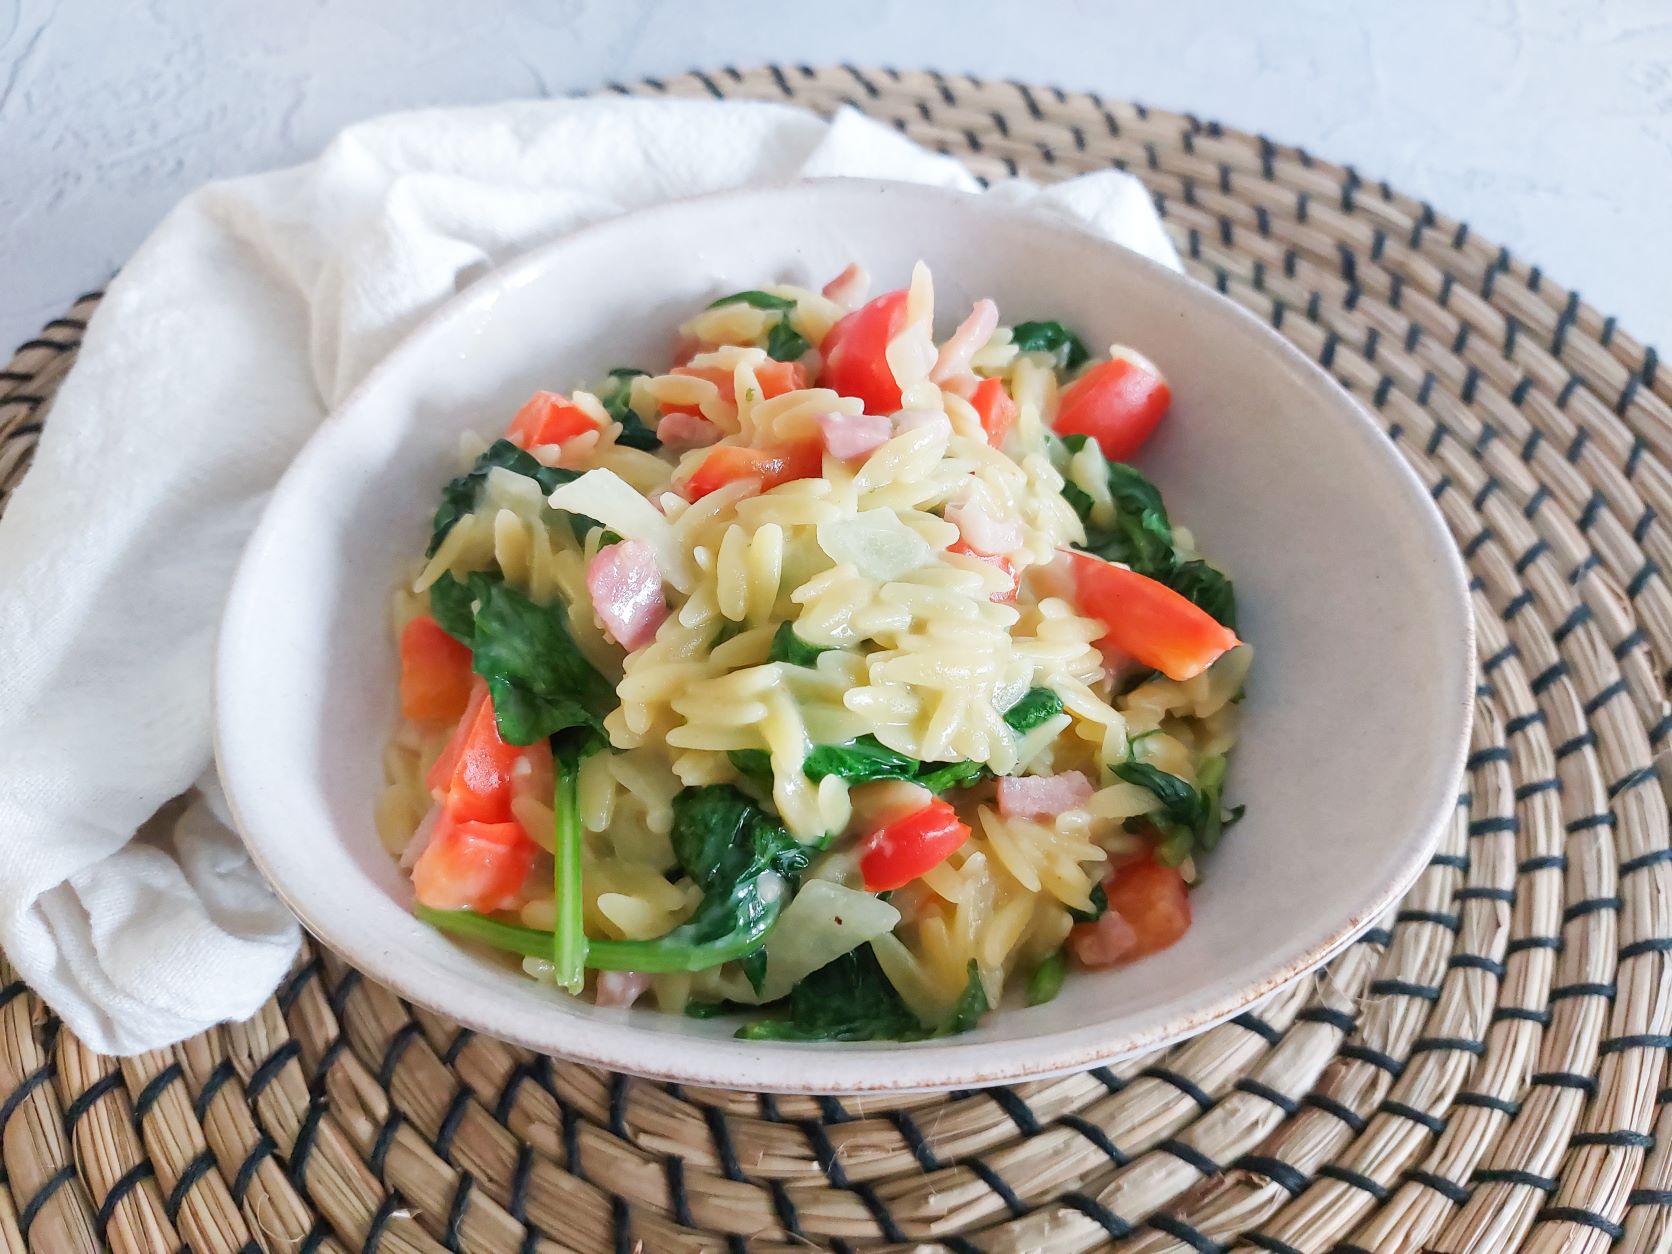 Orzo risotto met spinazie